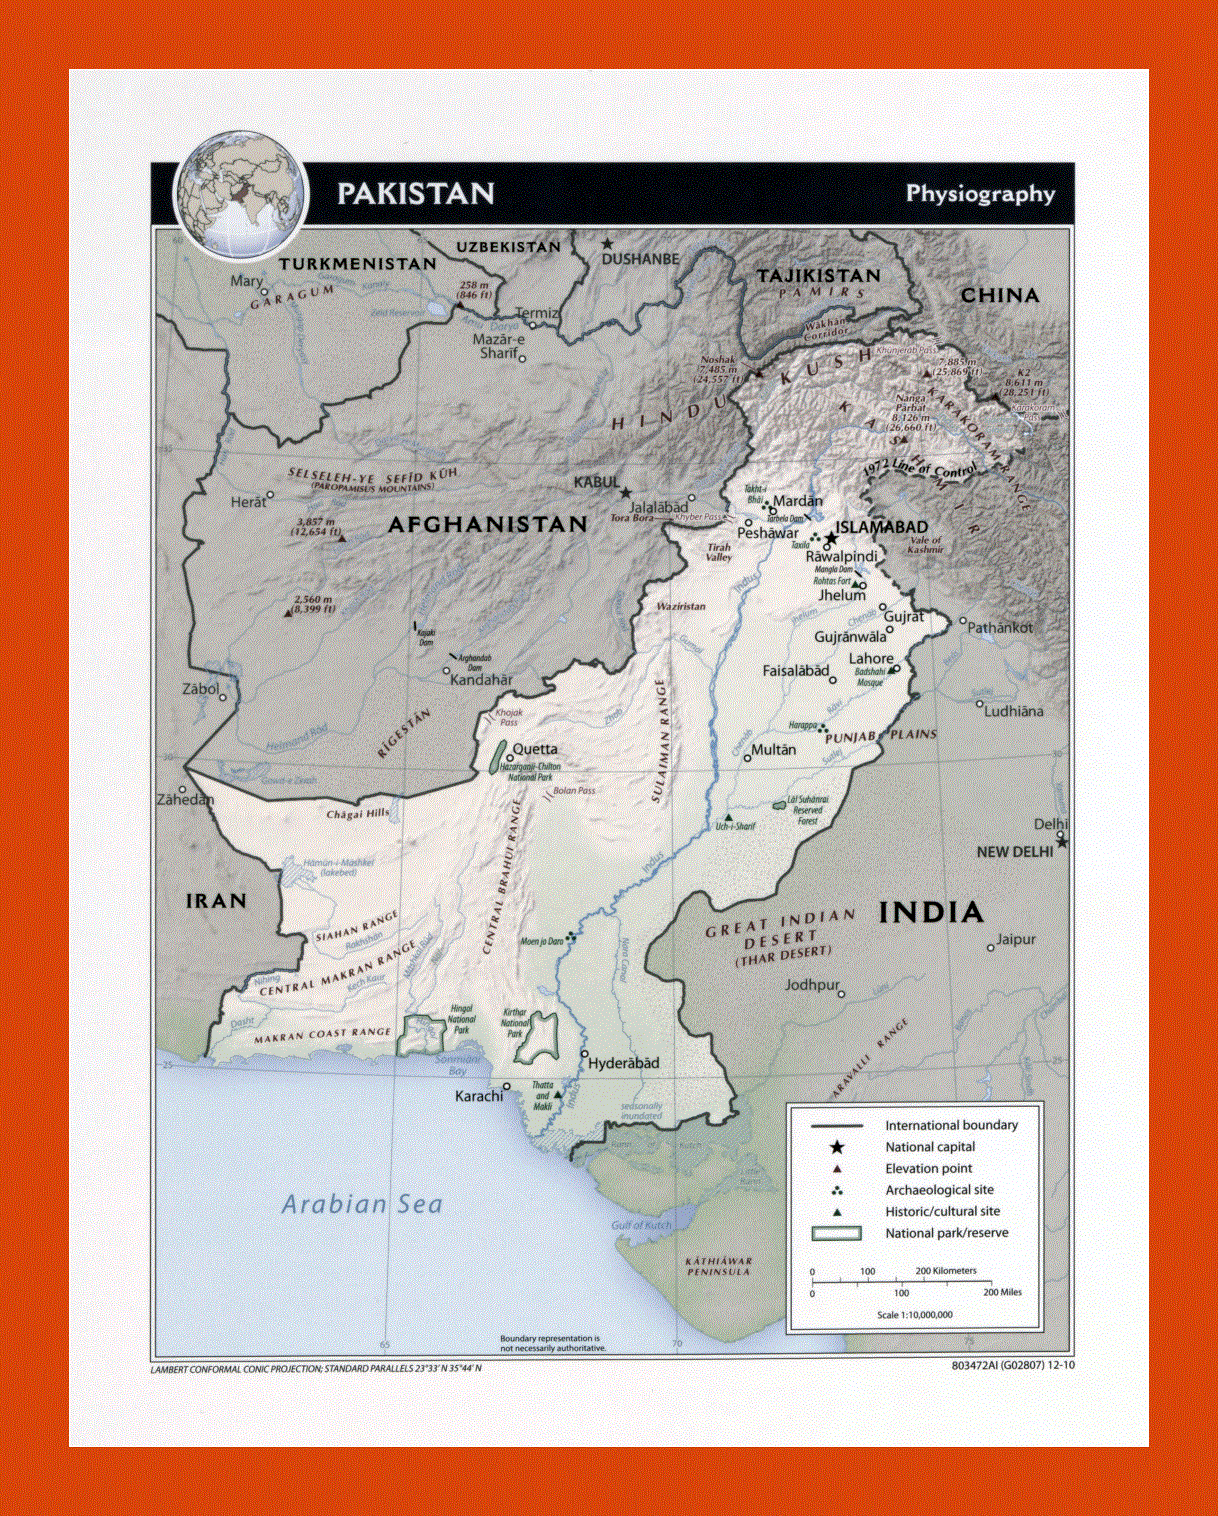 Physiography map of Pakistan - 2010